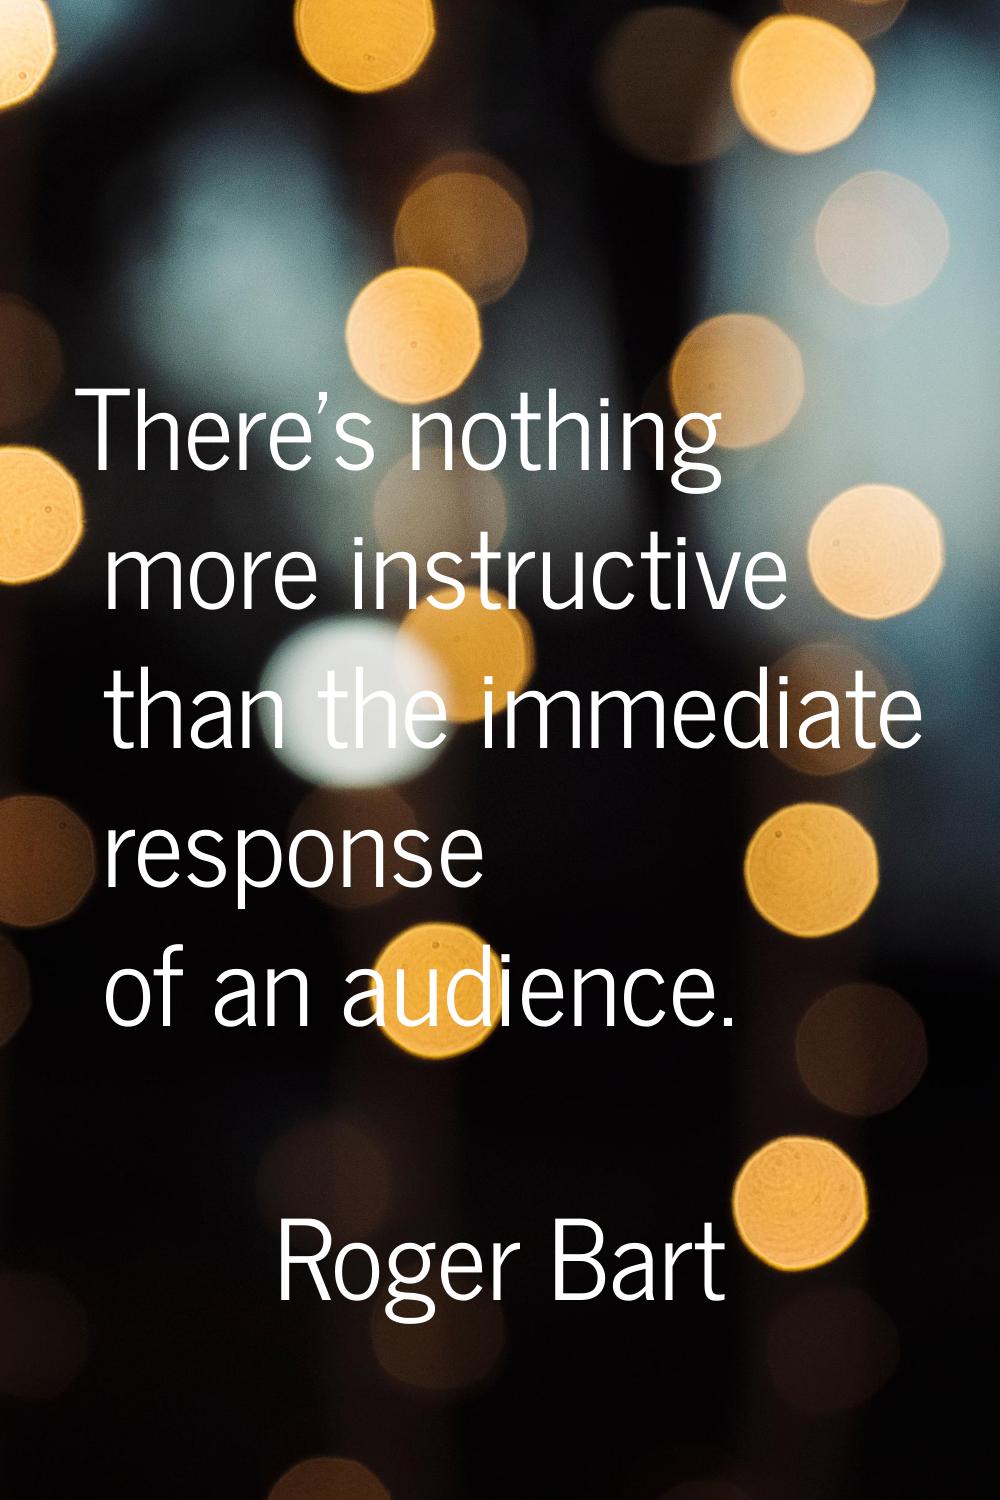 There's nothing more instructive than the immediate response of an audience.